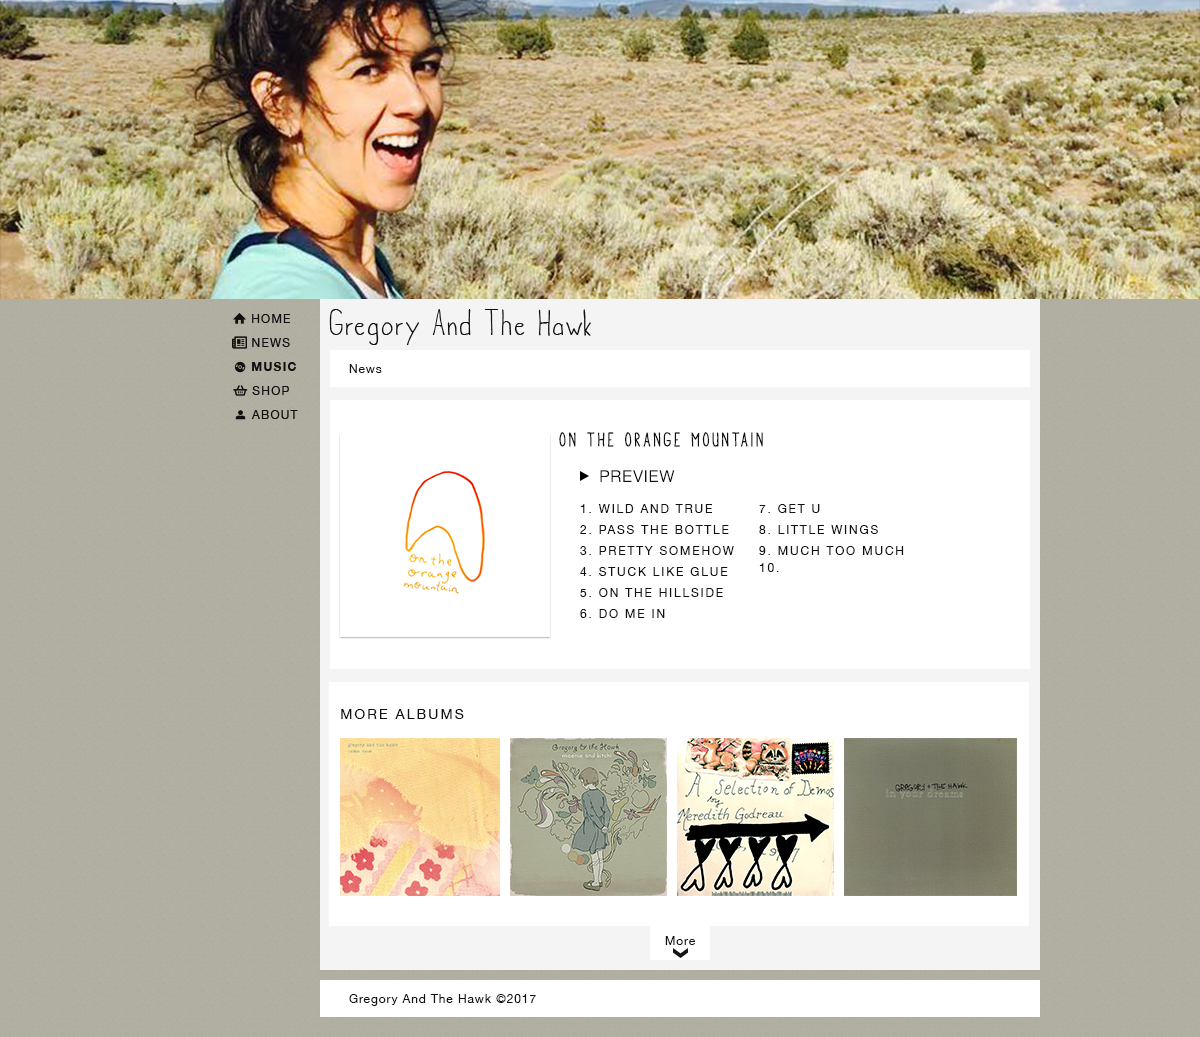 This is the discography page design for the Gregory and the Hawk website. It follows the same format of the home page. The header image on this page is a photo of the artist smiling with a grassy field in the background. The first content block shows a larger version of the album image, a music player for previewing the songs, and the album's track list. The second content block contains a grid of all of the band's songs. Clicking on an album from the grid would change the album and previews in the first content block.